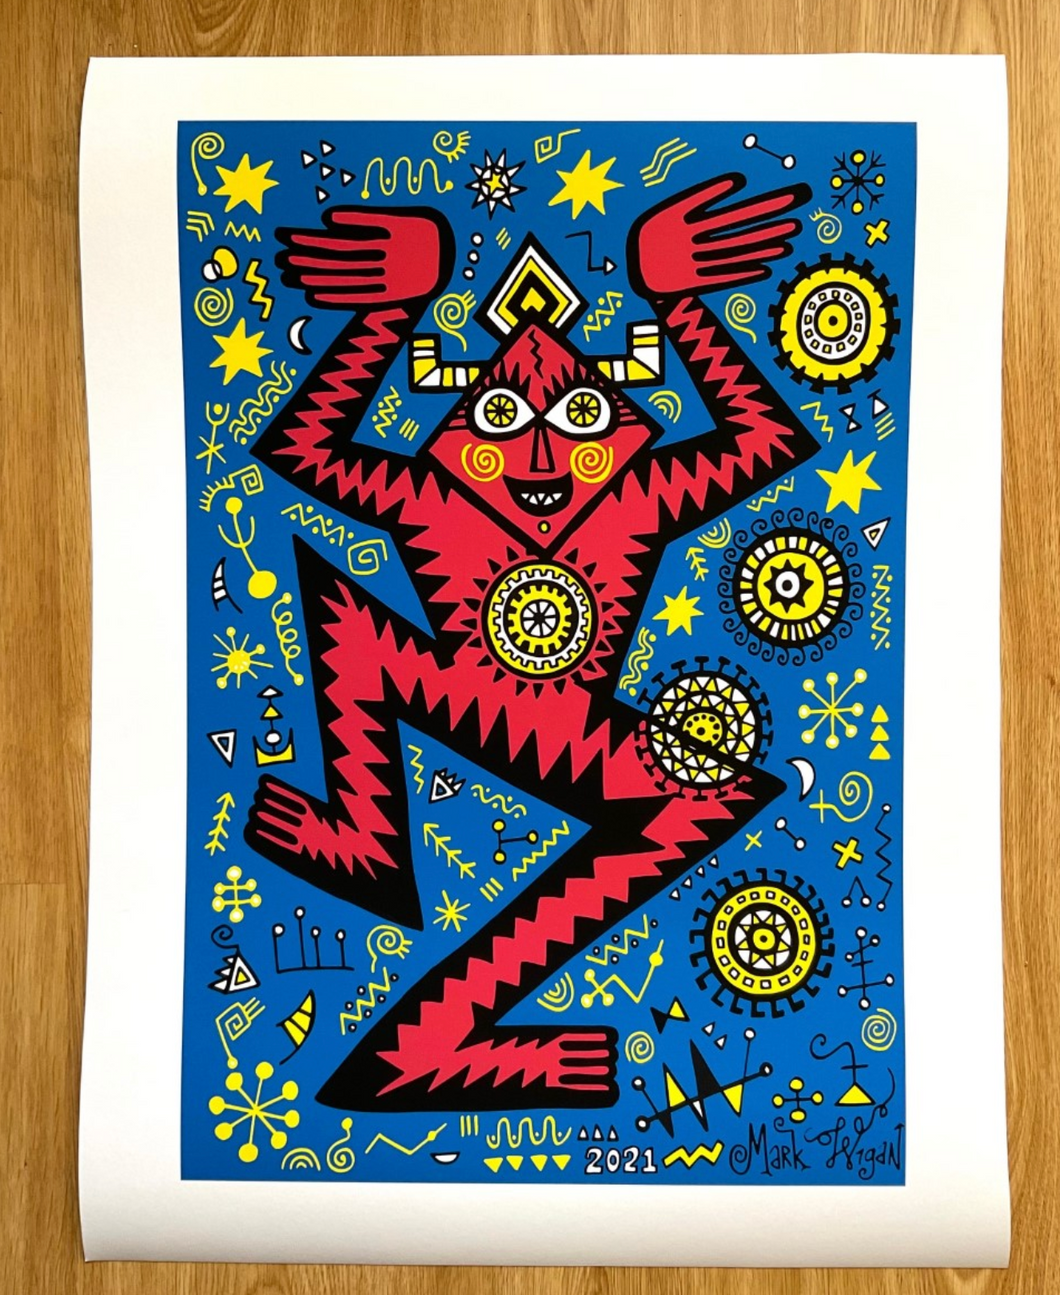 Starchaser A2 Limited Edition Giclee Print